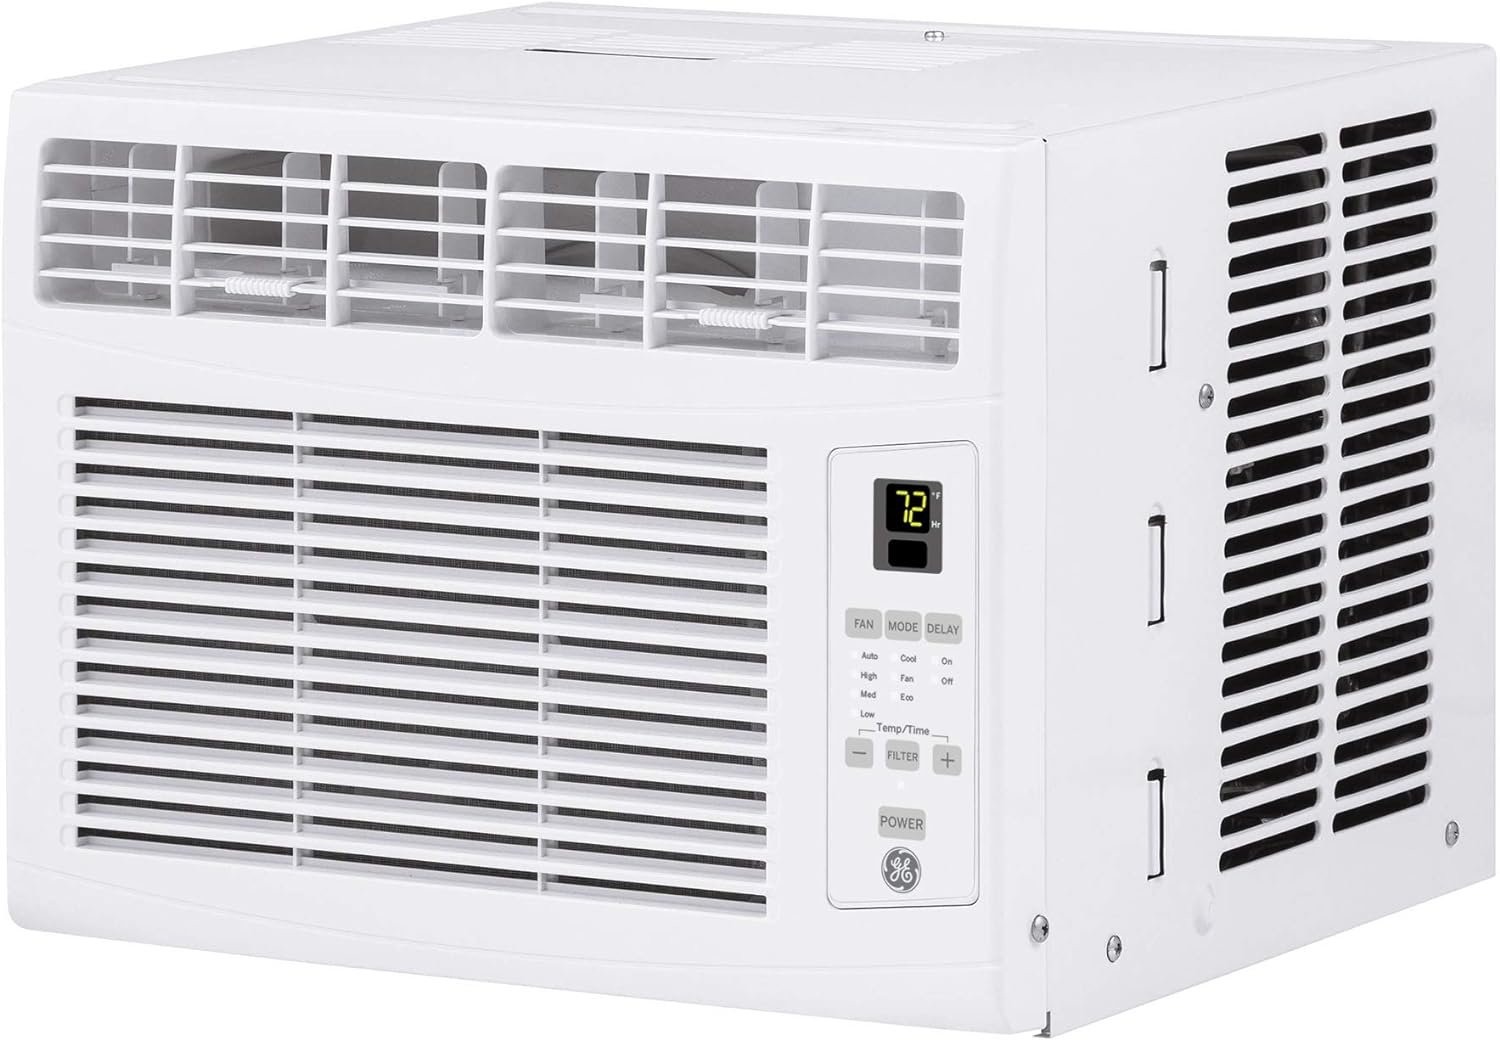 GE Electronic Window Air Conditioner 6000 BTU Review